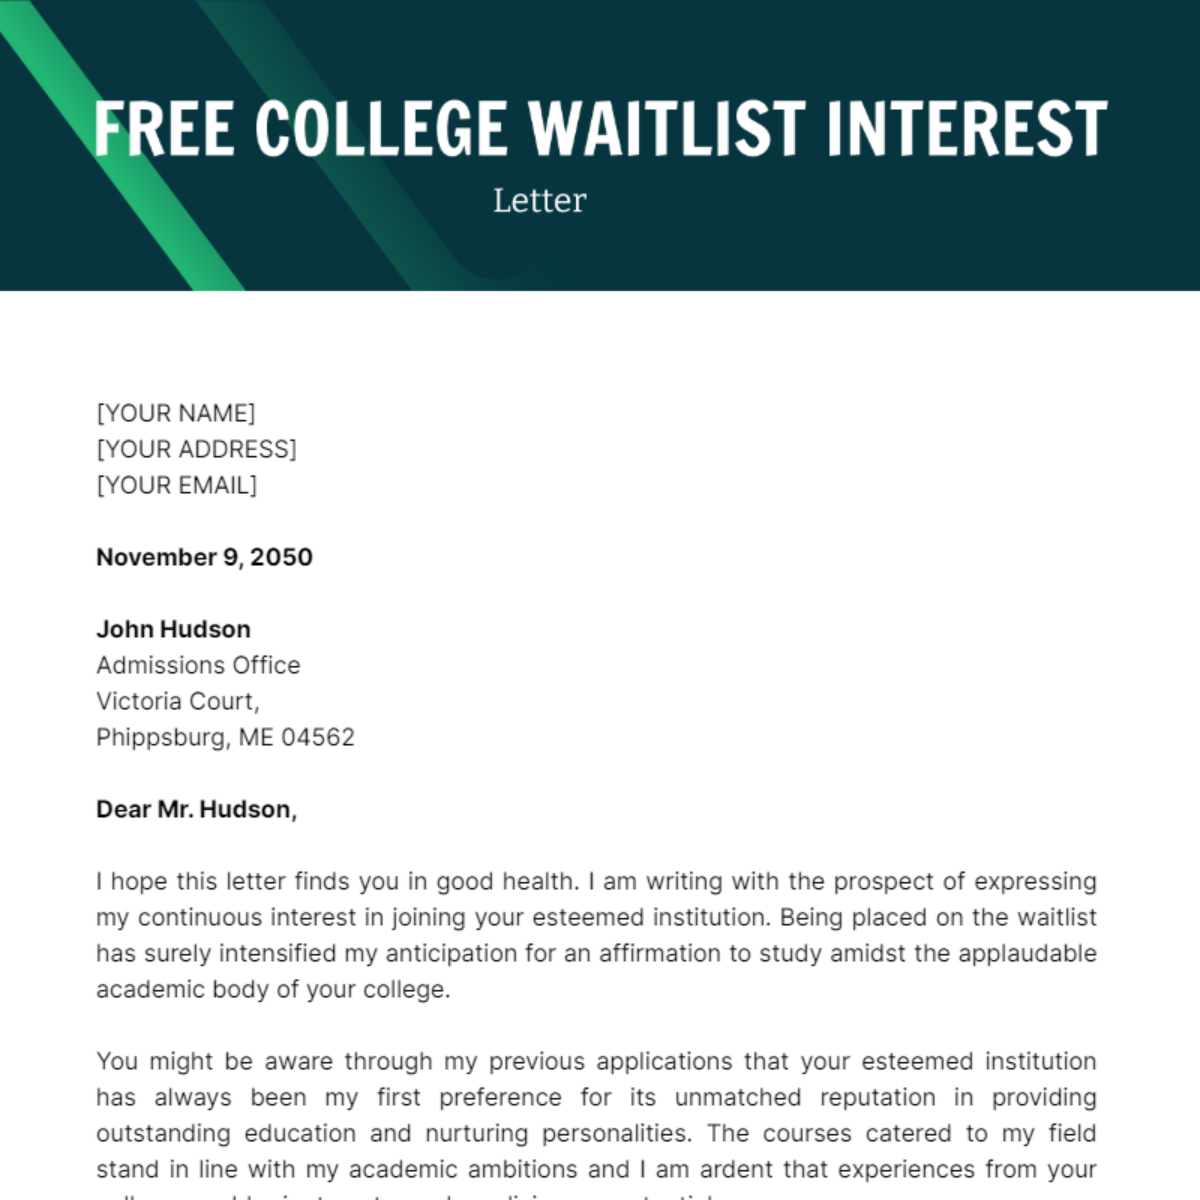 College Waitlist Letter of Interest template